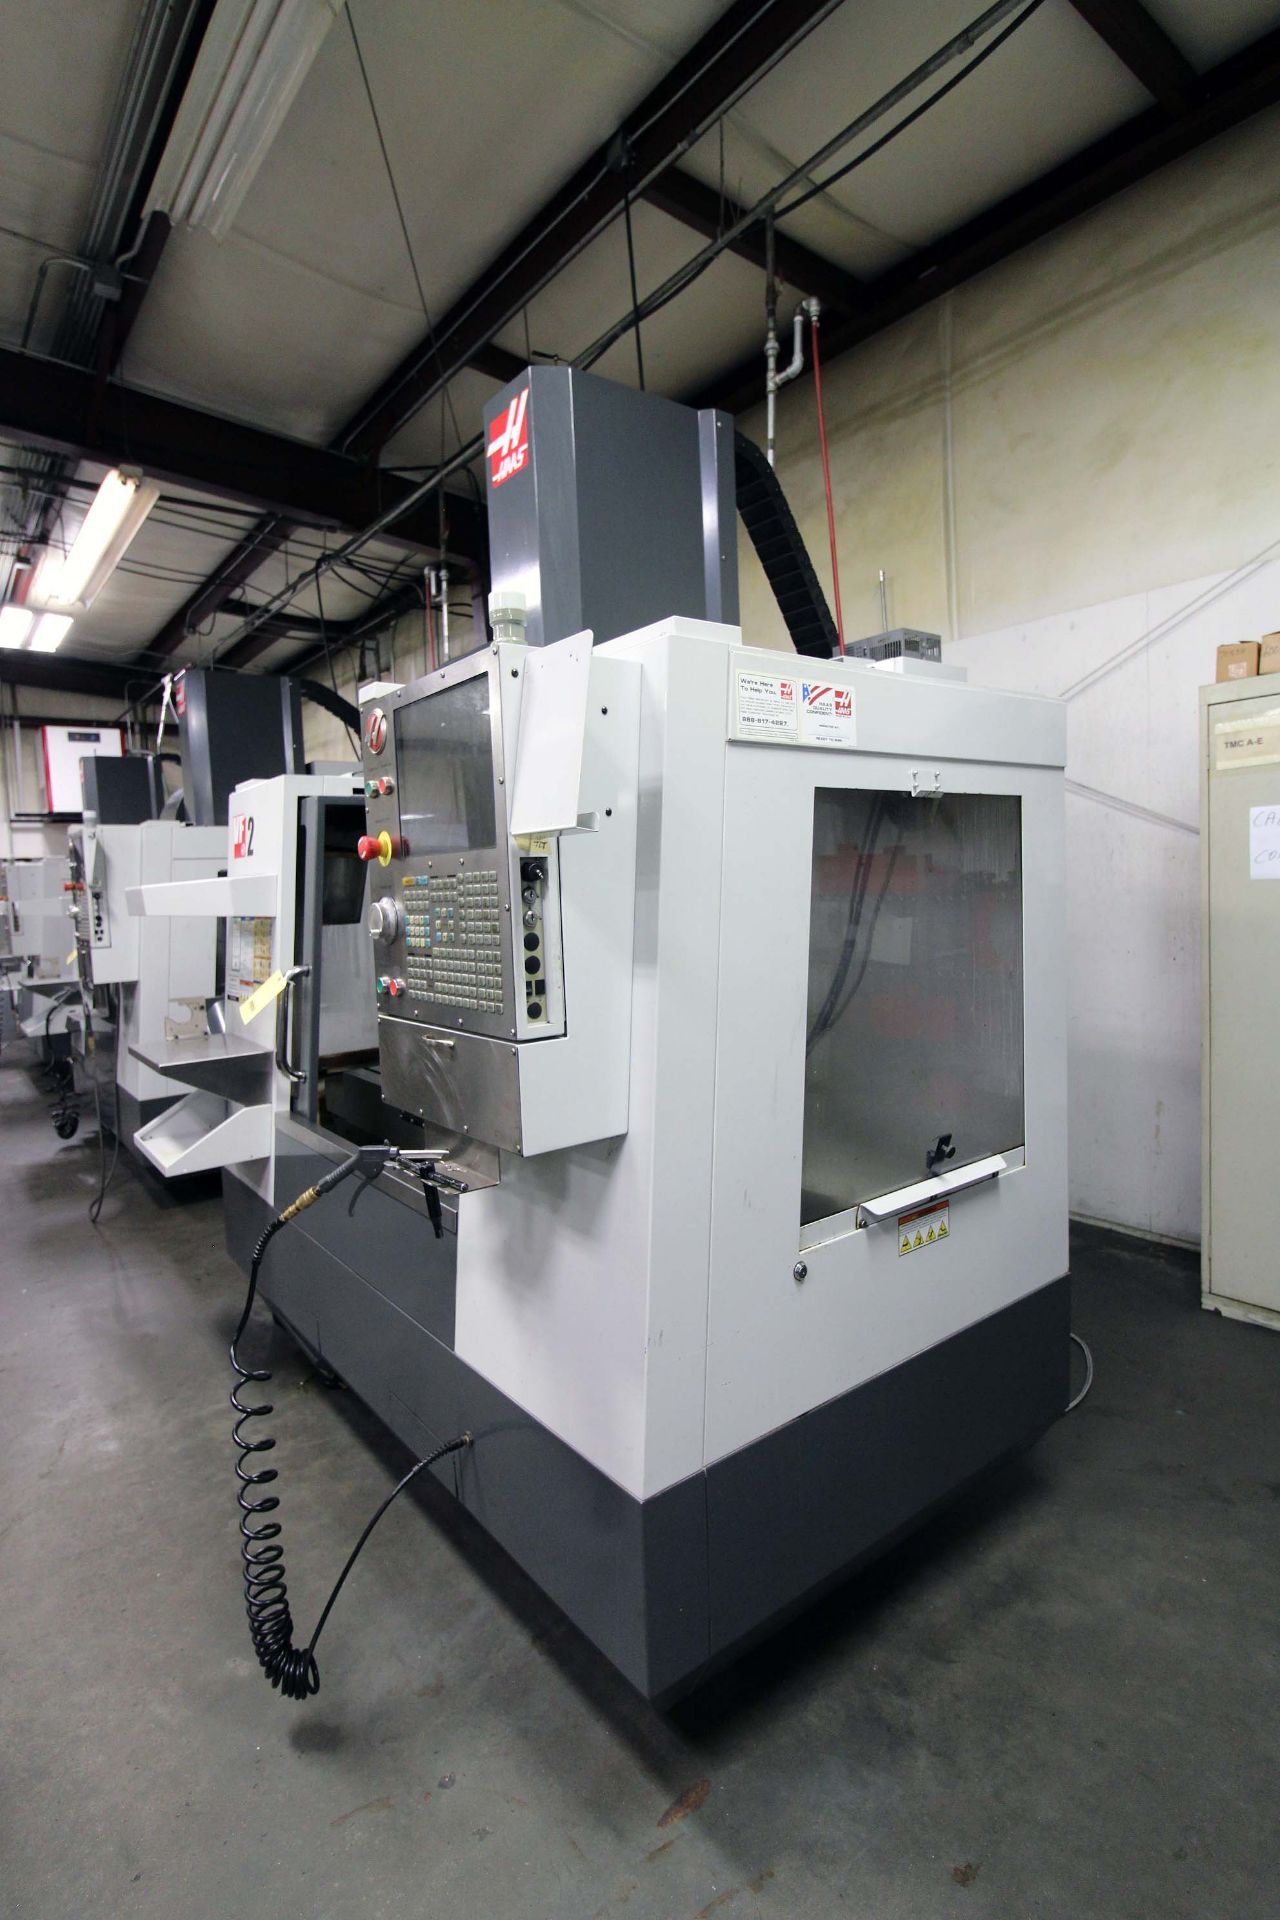 4-AXIS VERTICAL MACHINING CENTER, HAAS MDL. VF2, new 9/2011, 36” x 14” table, 30” X, 16” Y, 20” Z- - Image 2 of 10